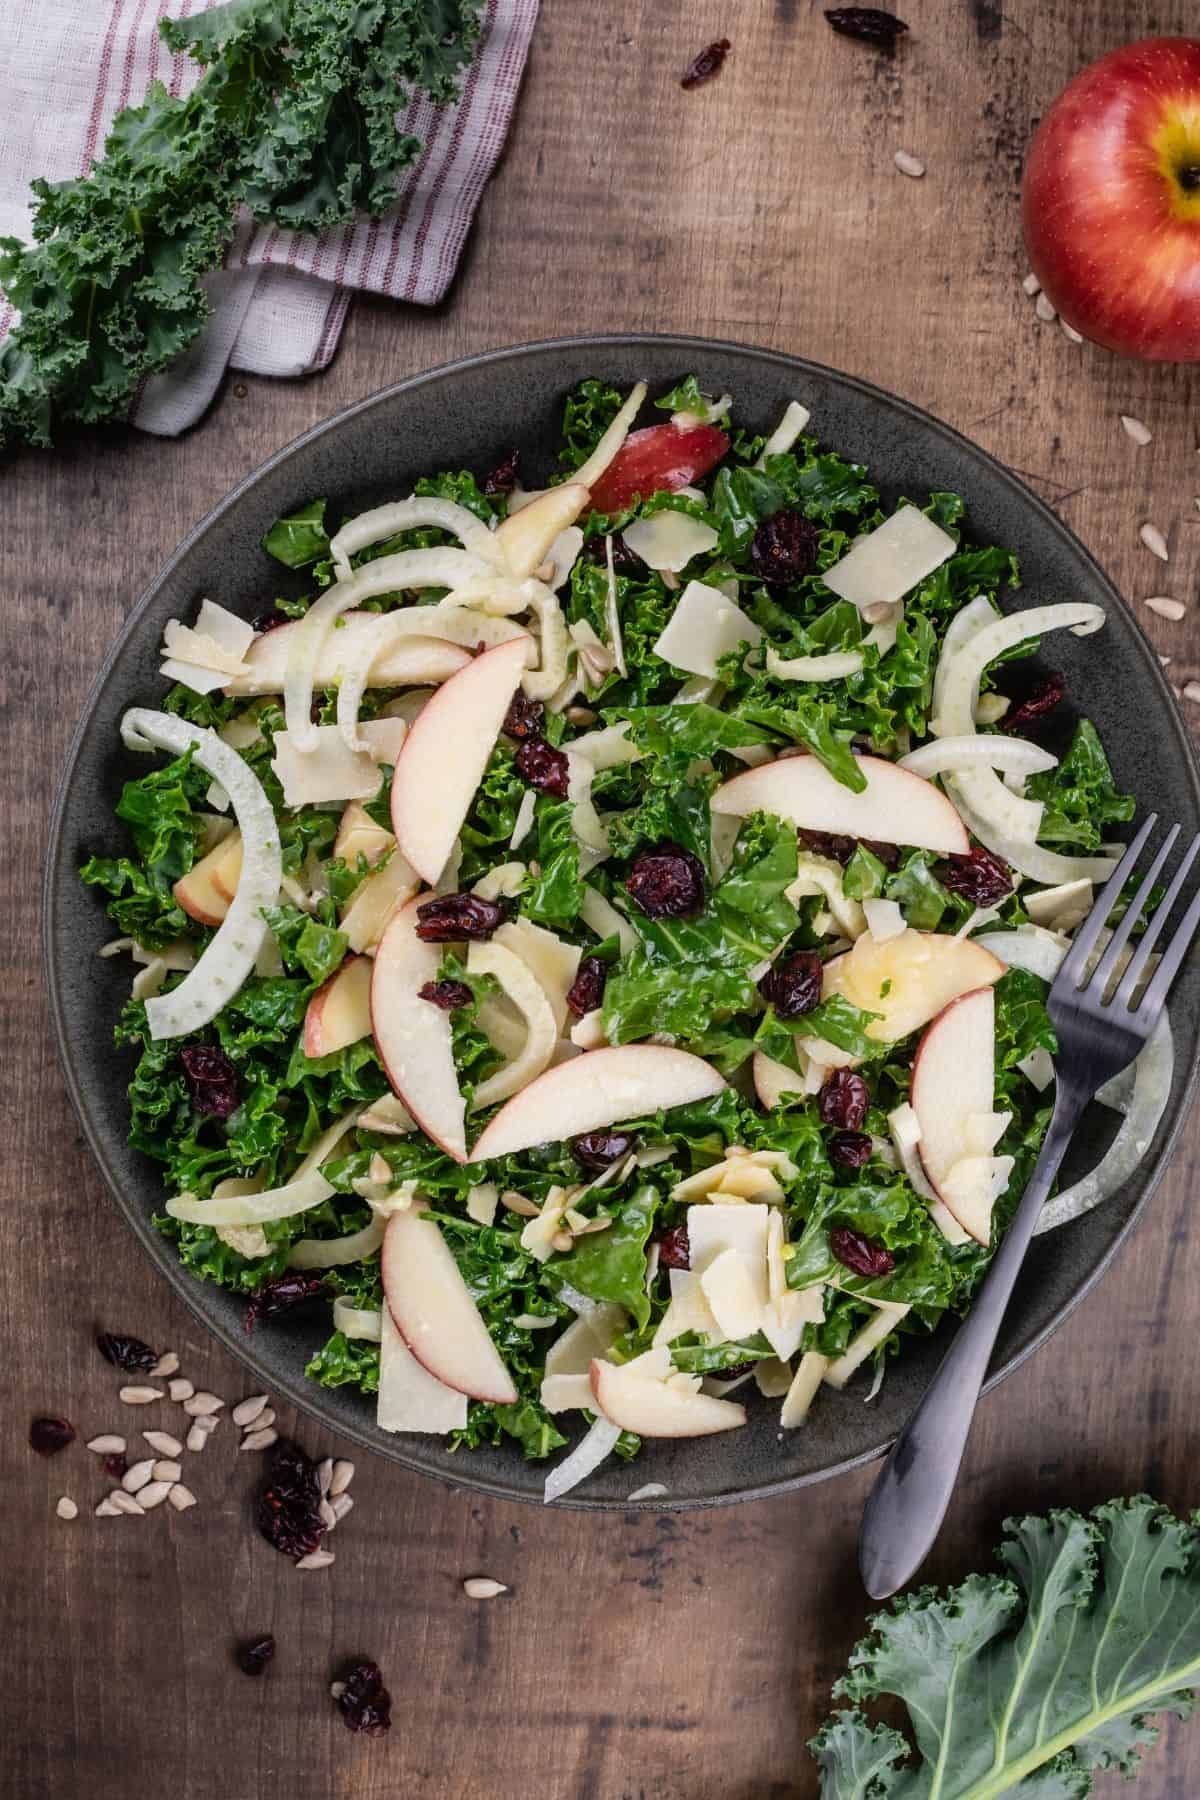 overview of a kale and cranberry salad with fennel and apple slices in a dark bowl with a dark metal fork on a wood table. ingredients like apples and more kale surround the bowl.